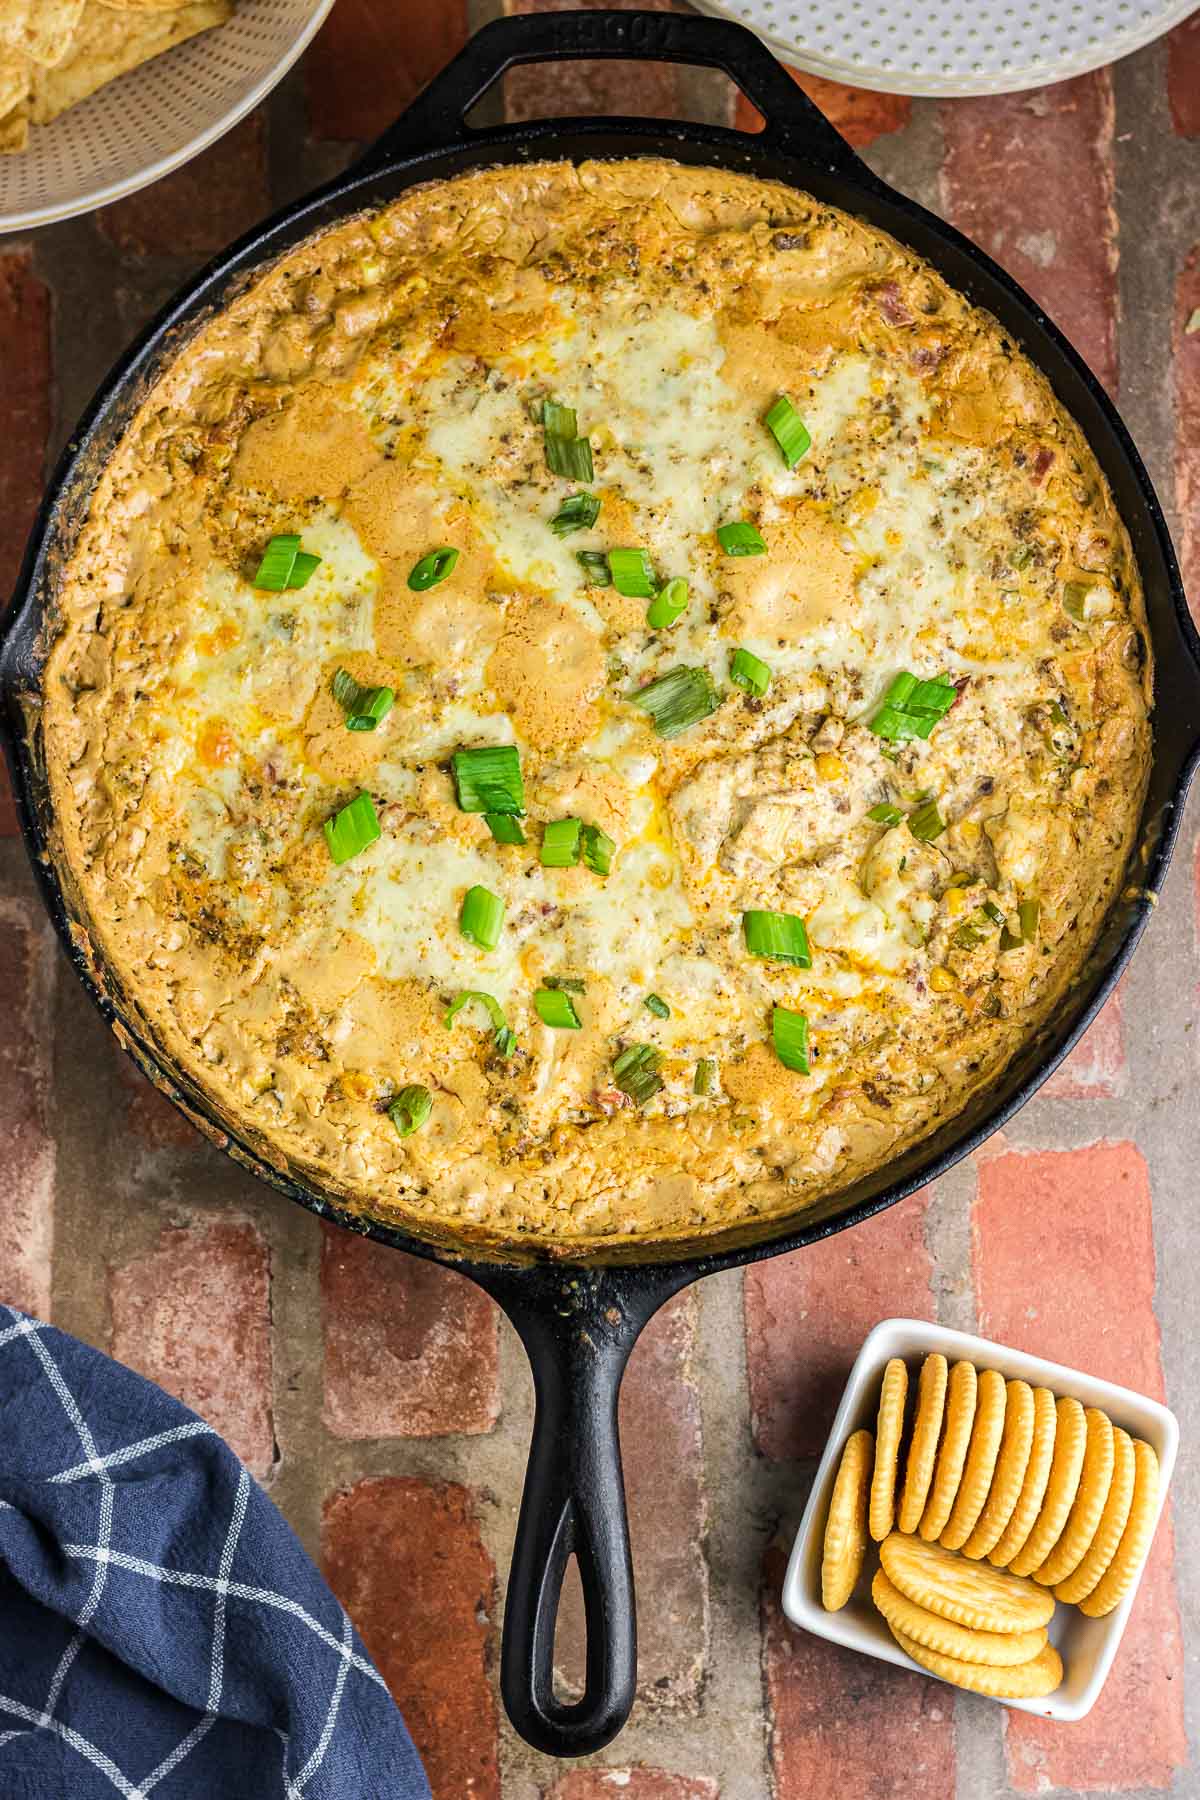 Baked cowboy dip in a skillet next to some crackers.